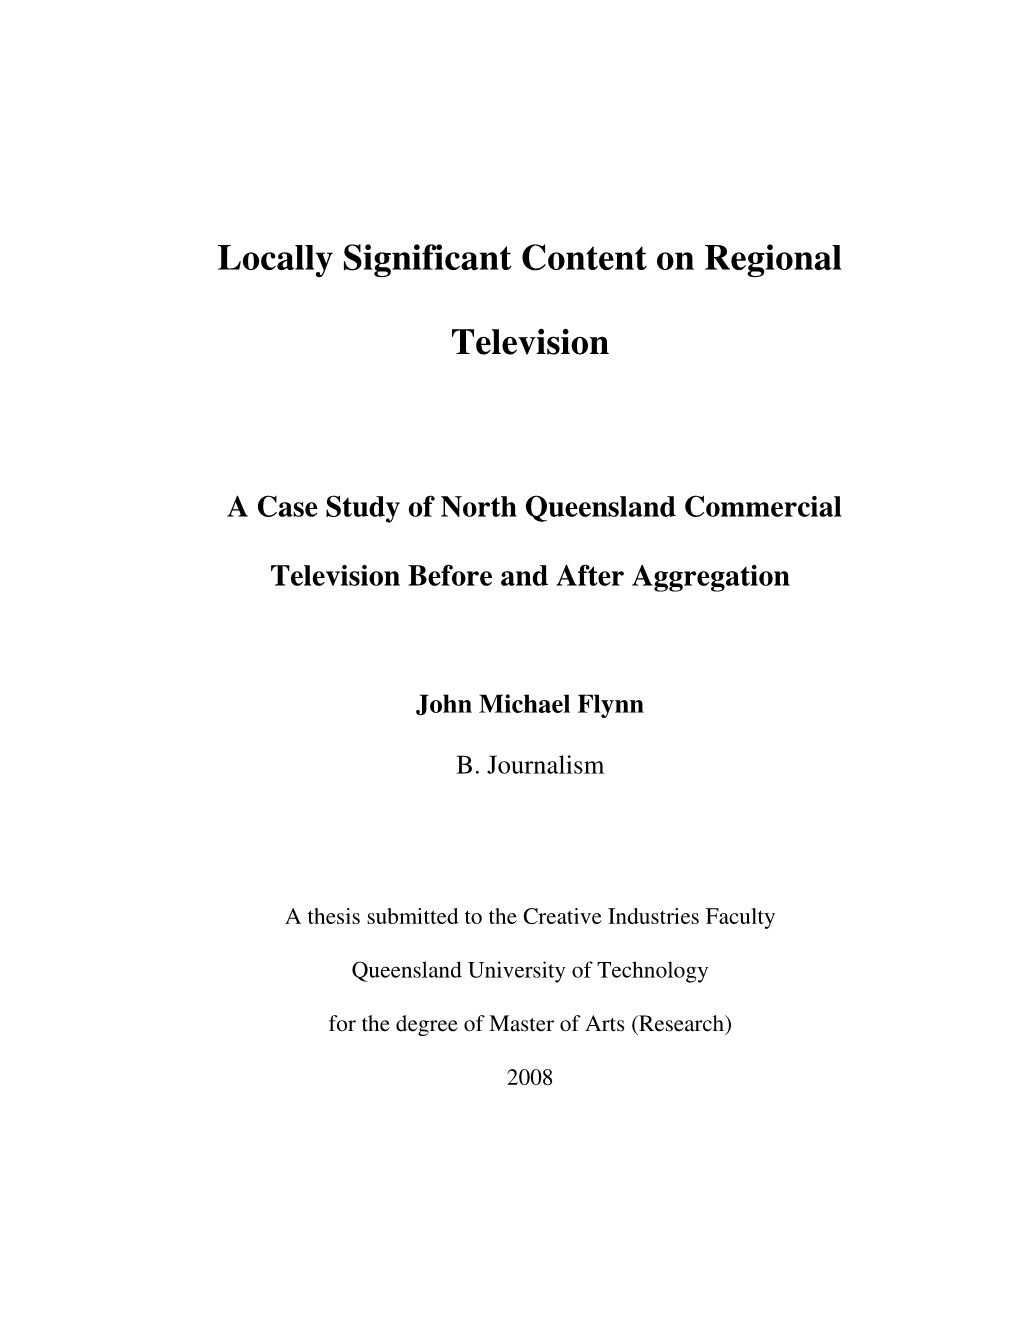 Locally Significant Content on Regional Television